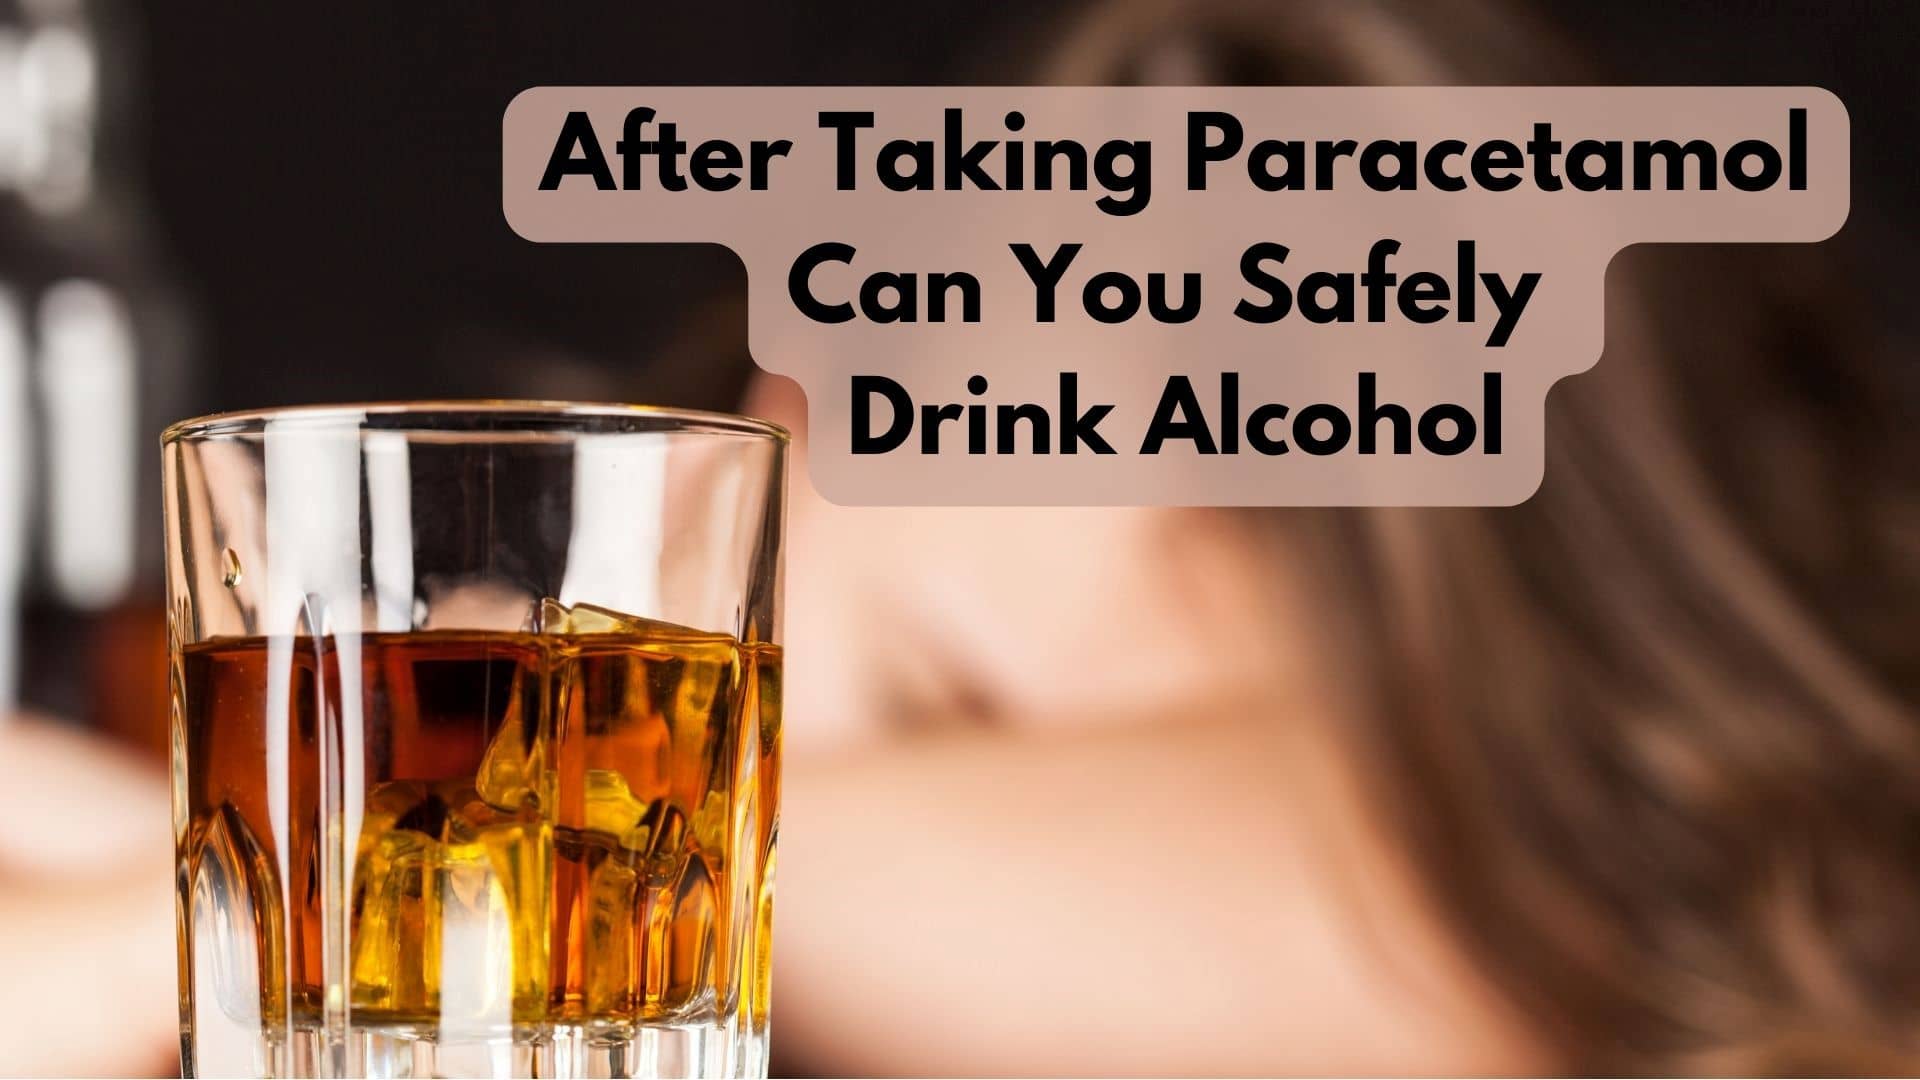 How Long After Taking Paracetamol Can You Safely Drink Alcohol?